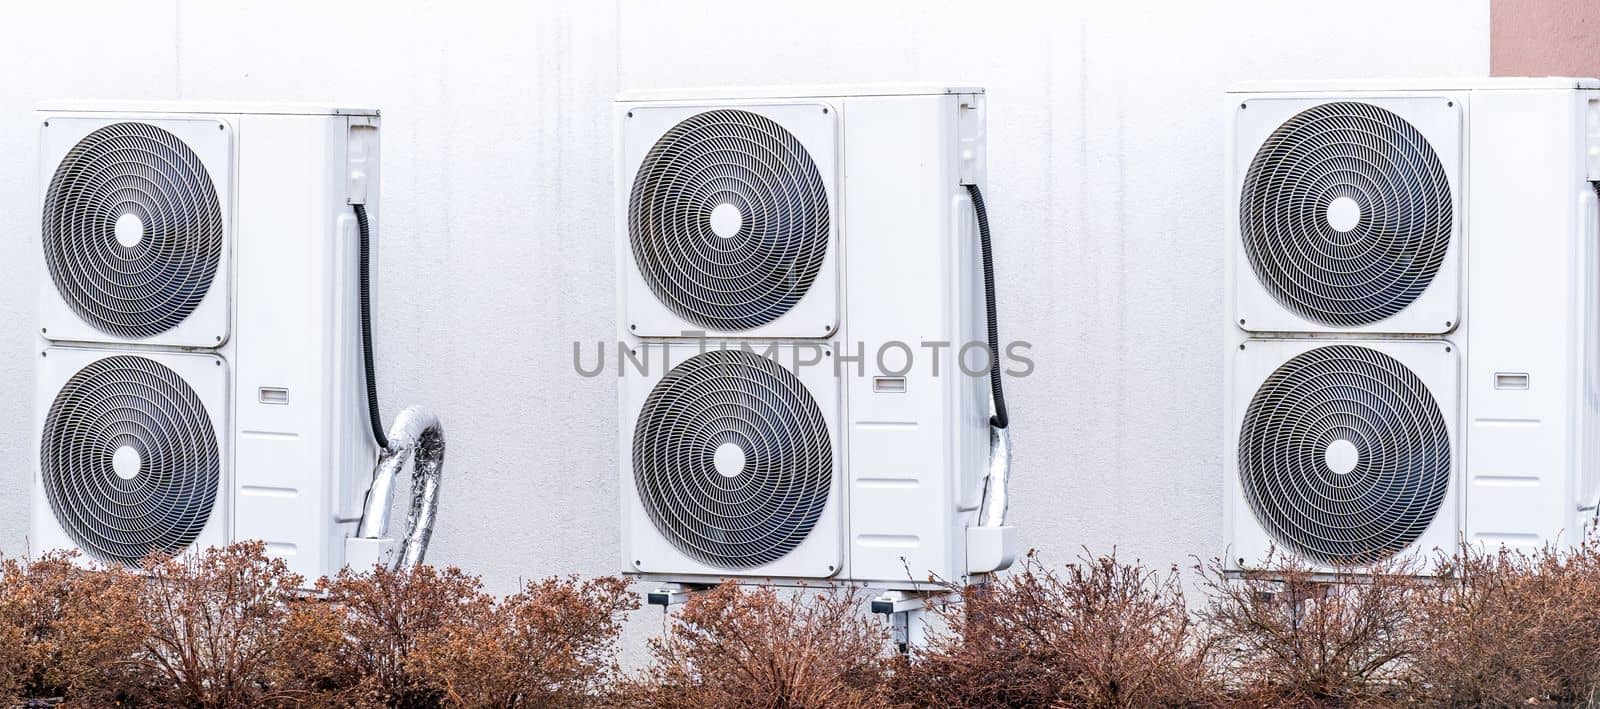 heat pumps for heating and water heating in buildings by Edophoto